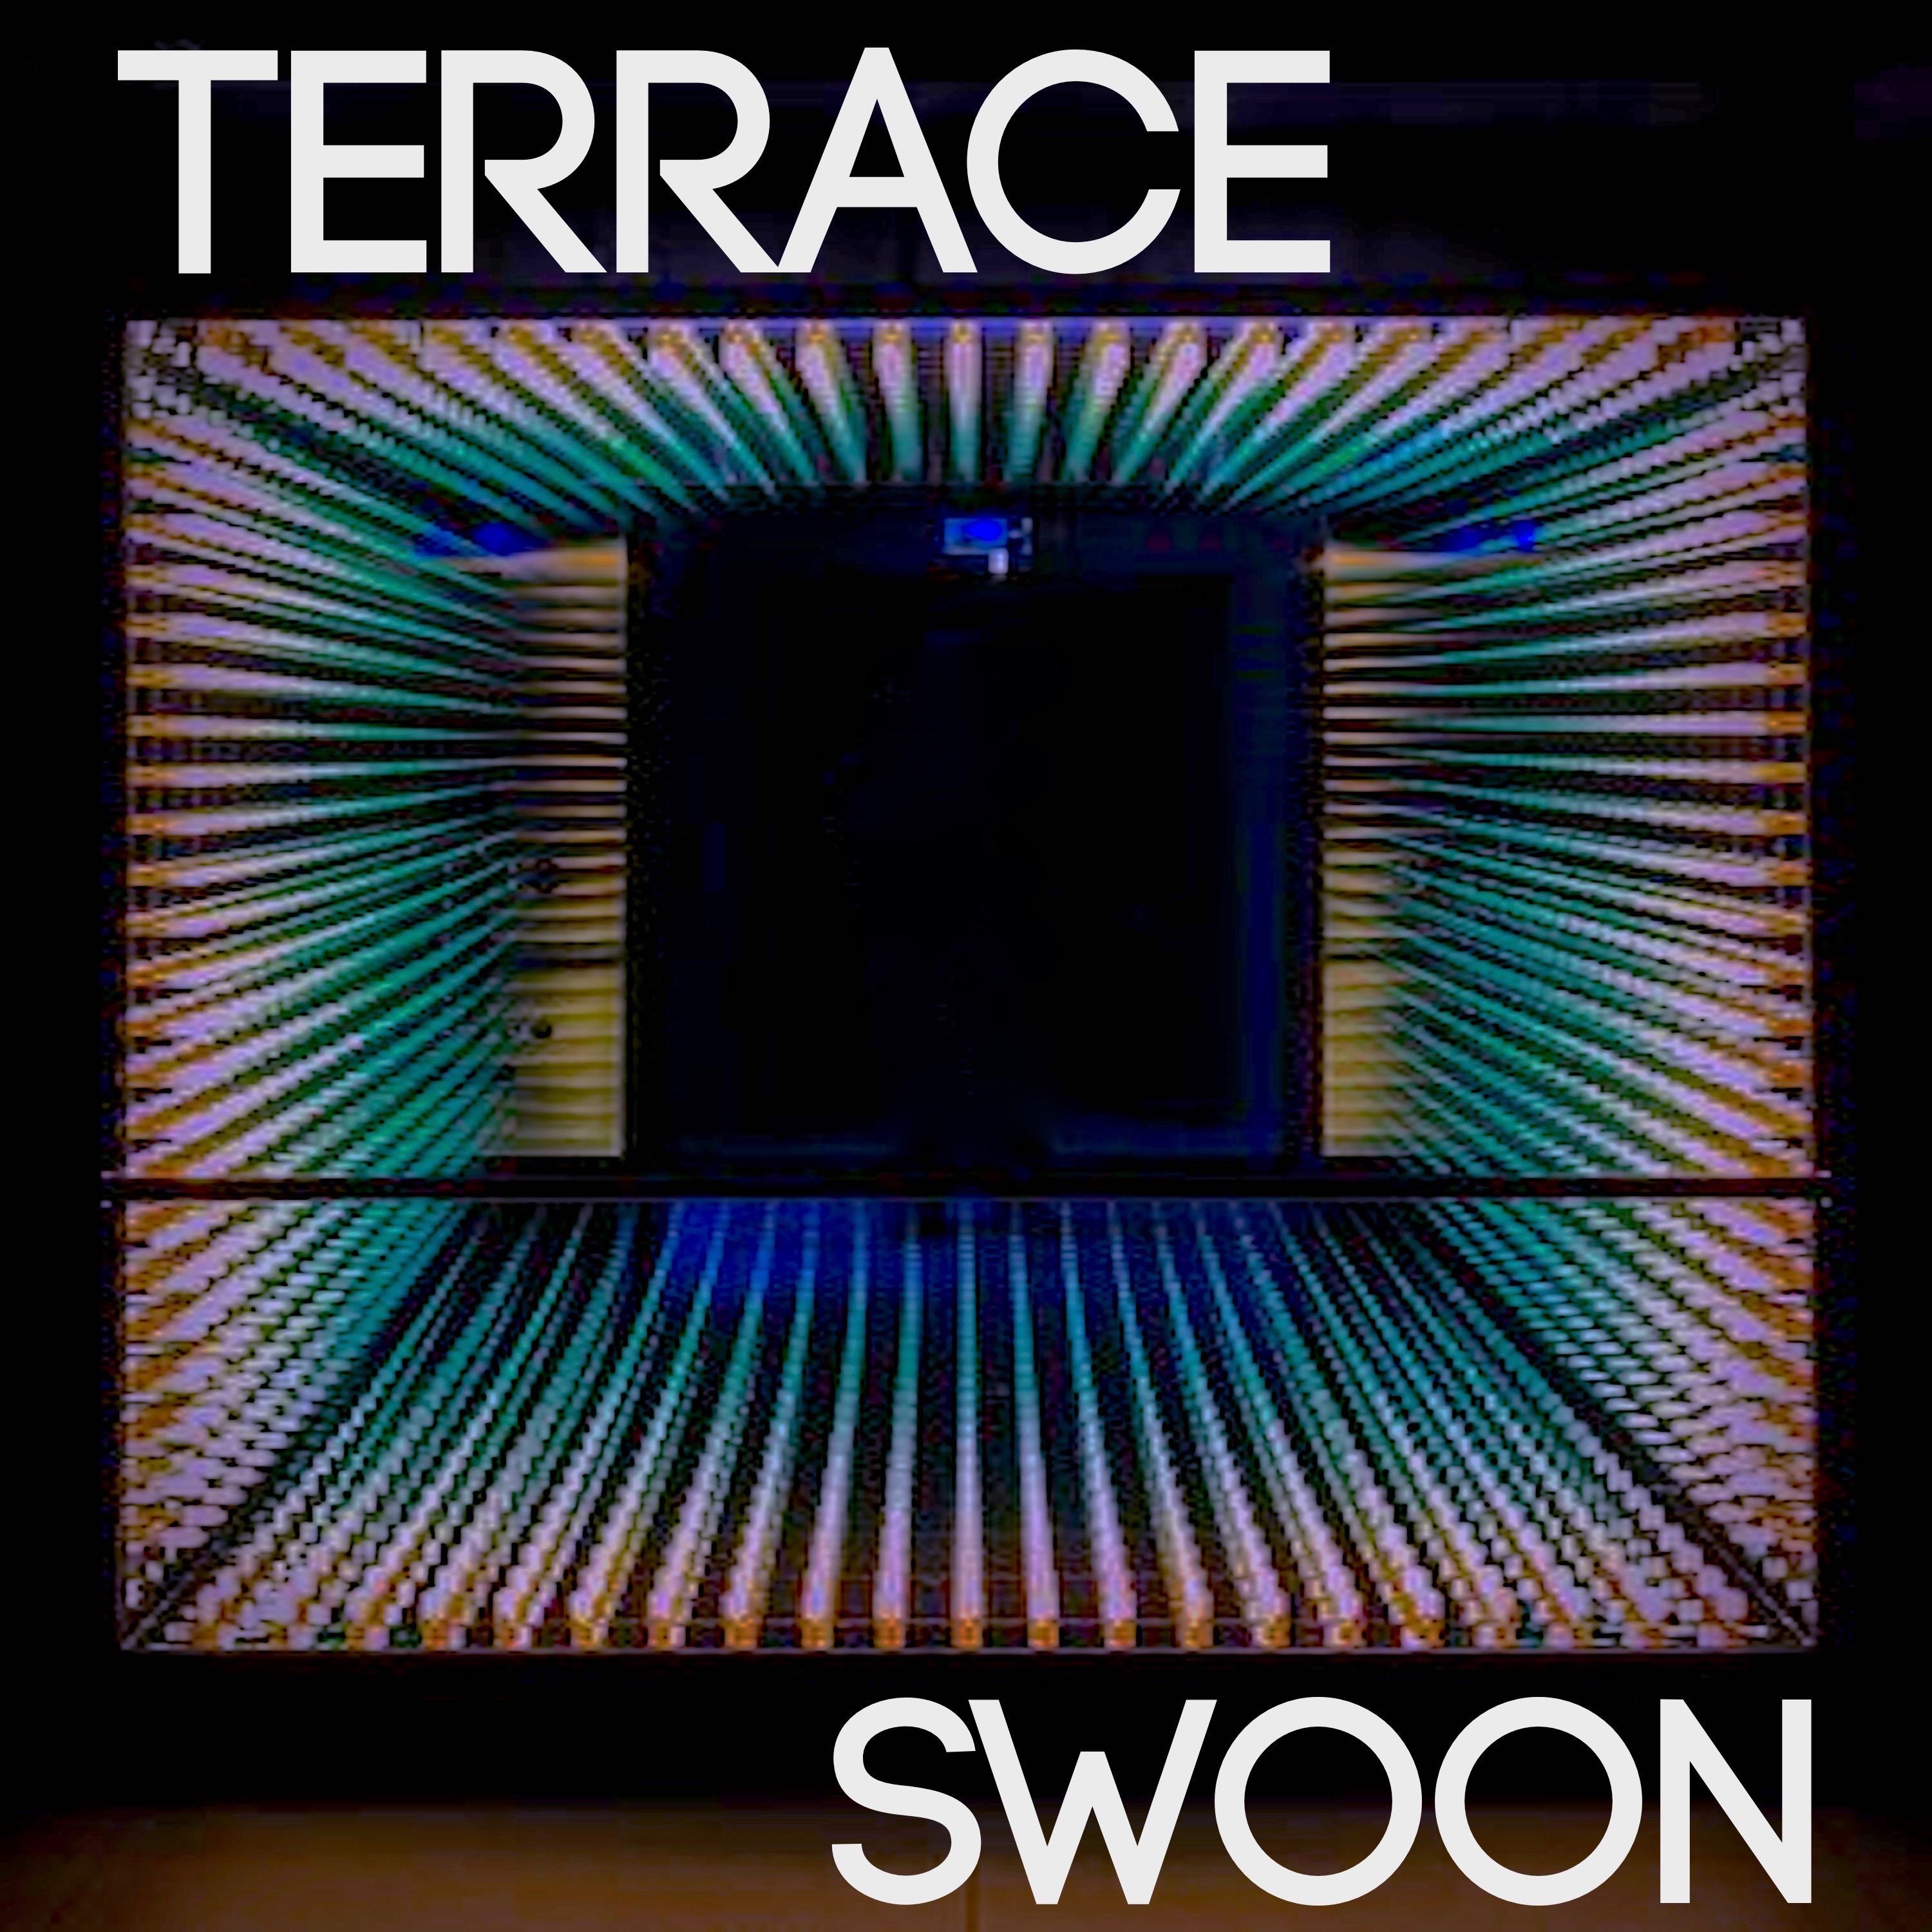 "Swoon" by Terrace, is Northern Transmissions' 'Song of the Day'